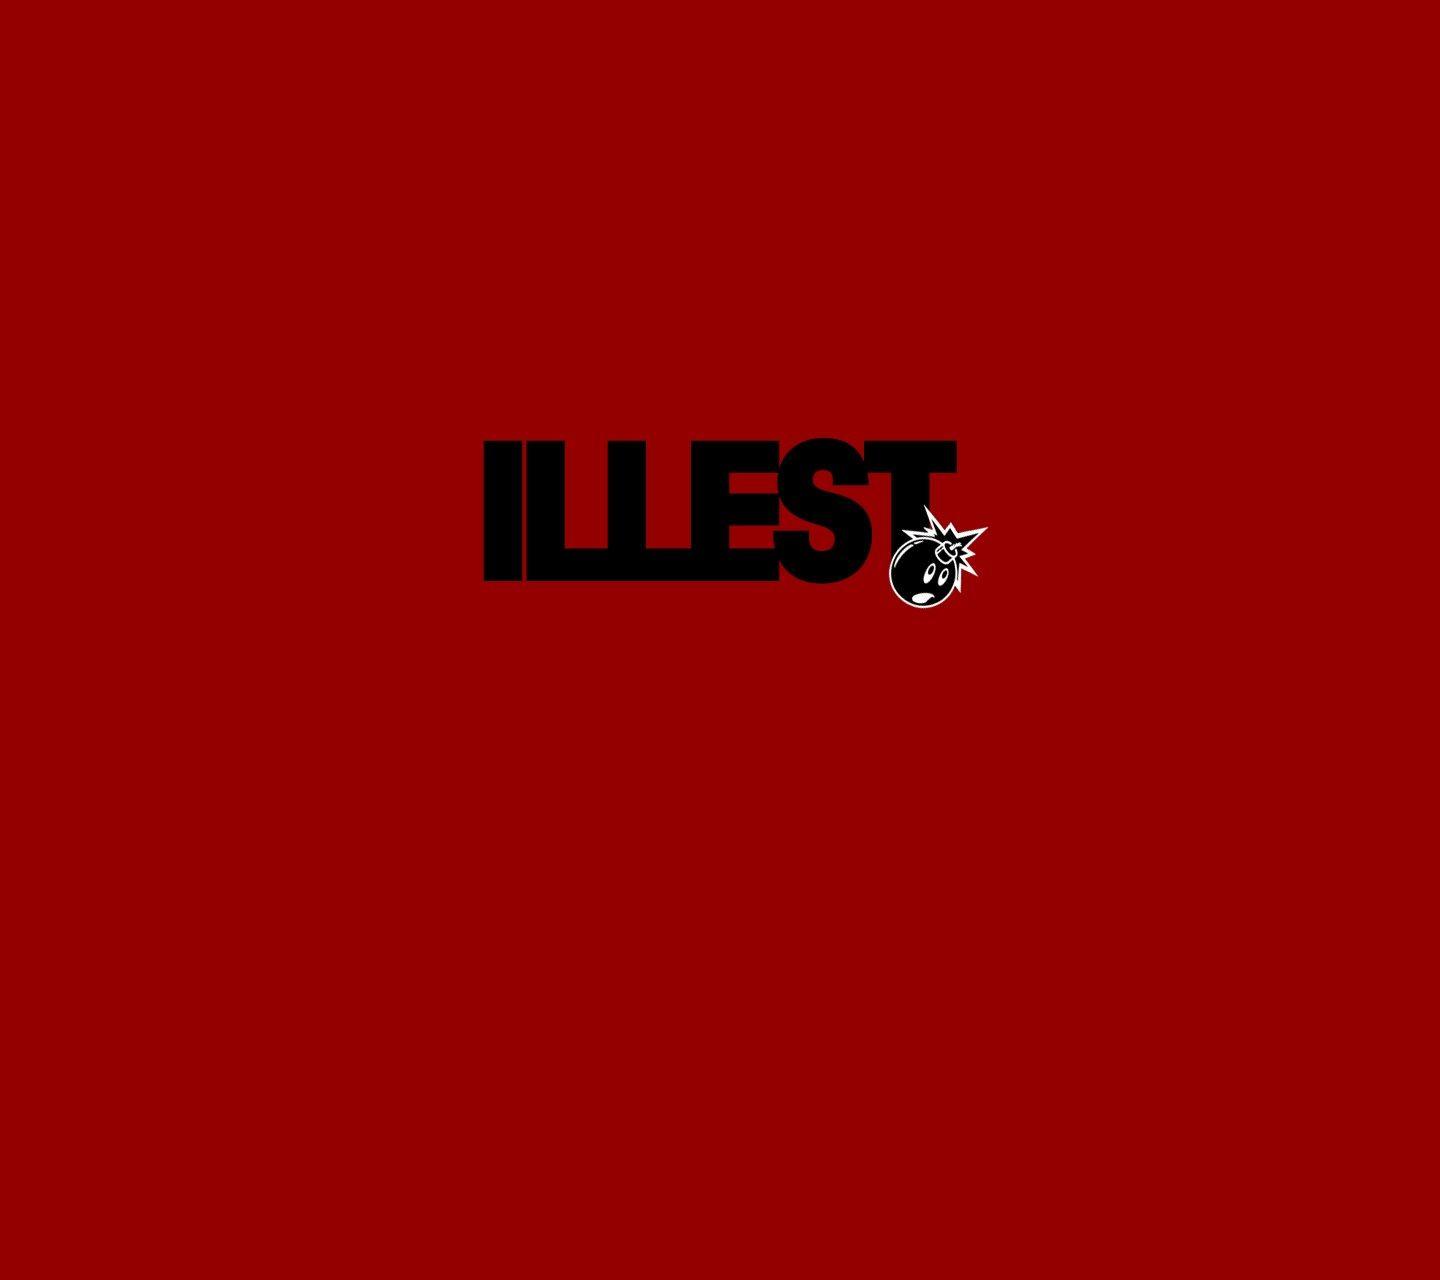 illest wallpaper HD iphone Wallppapers Gallery